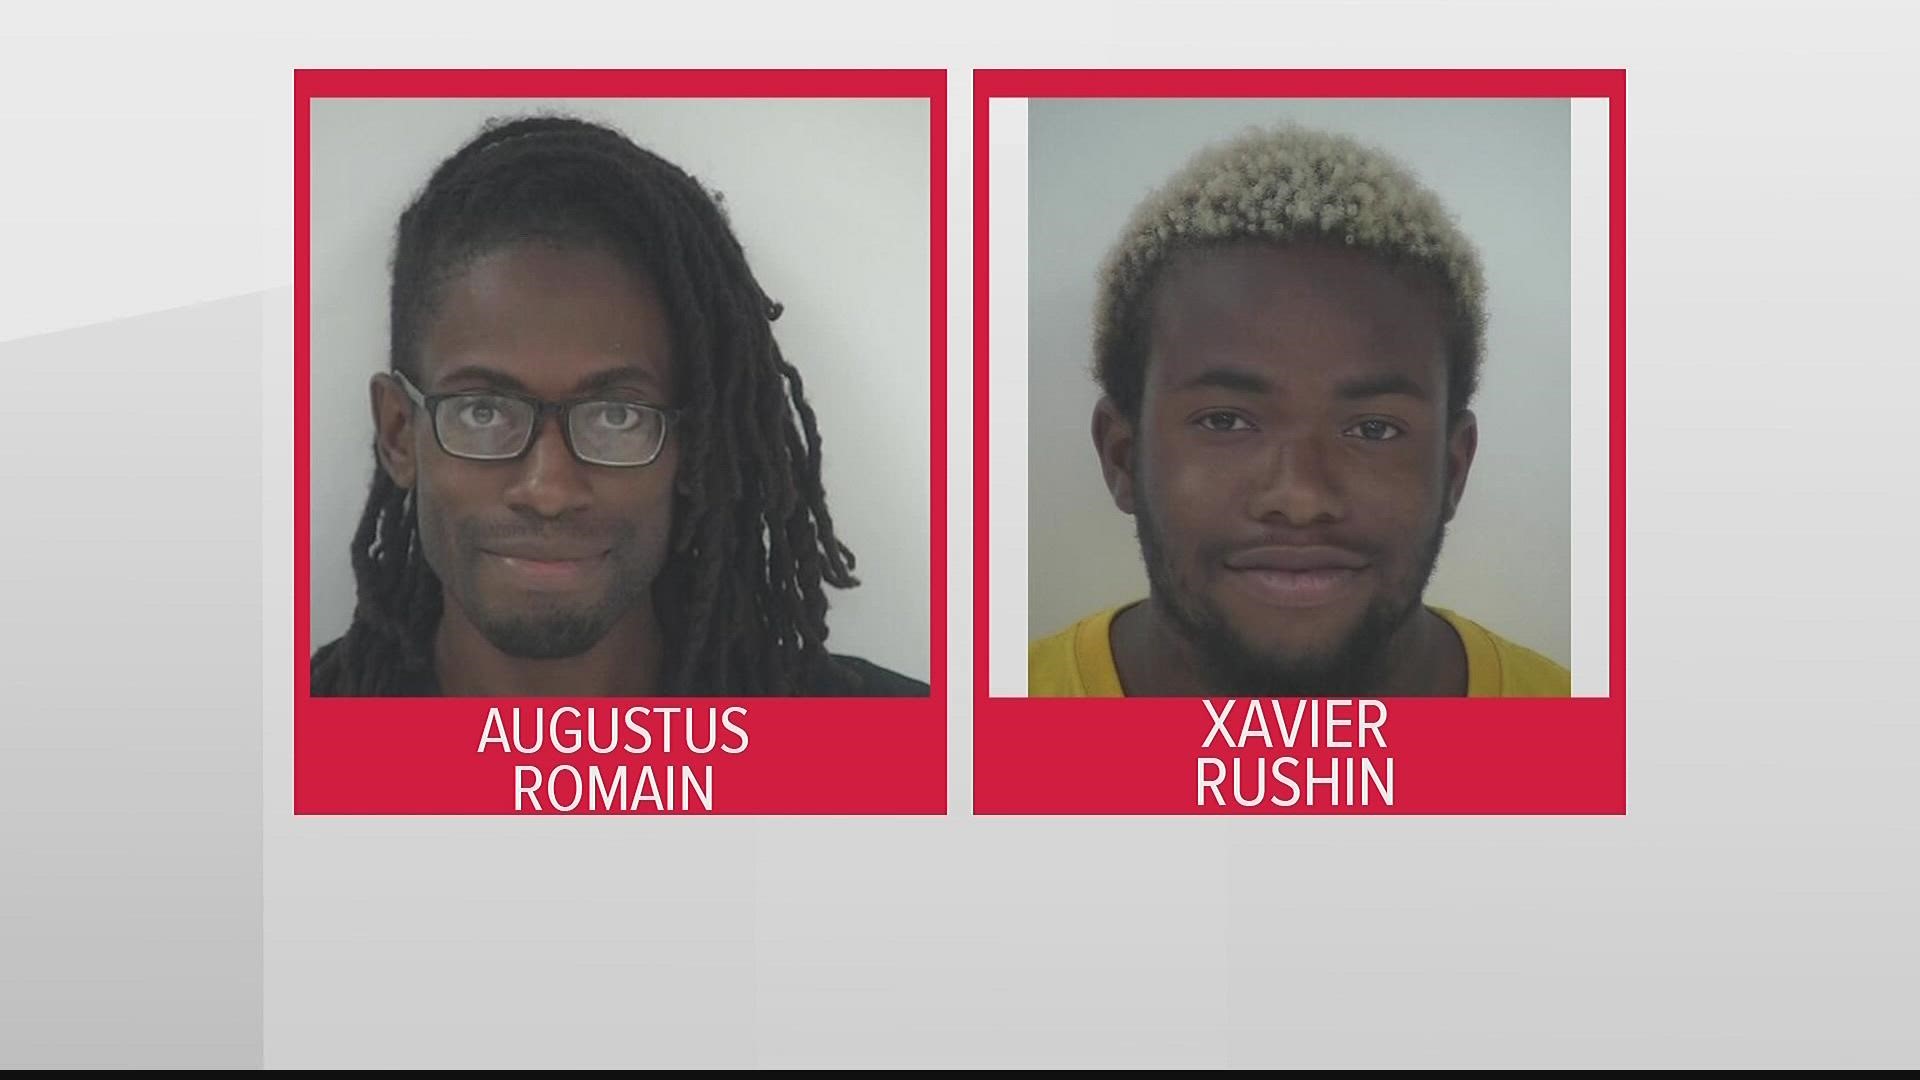 Two members of the group have been charged with felonies relating to an alleged kidnapping and sexual assault in July at the house the group rents in Fayetteville.